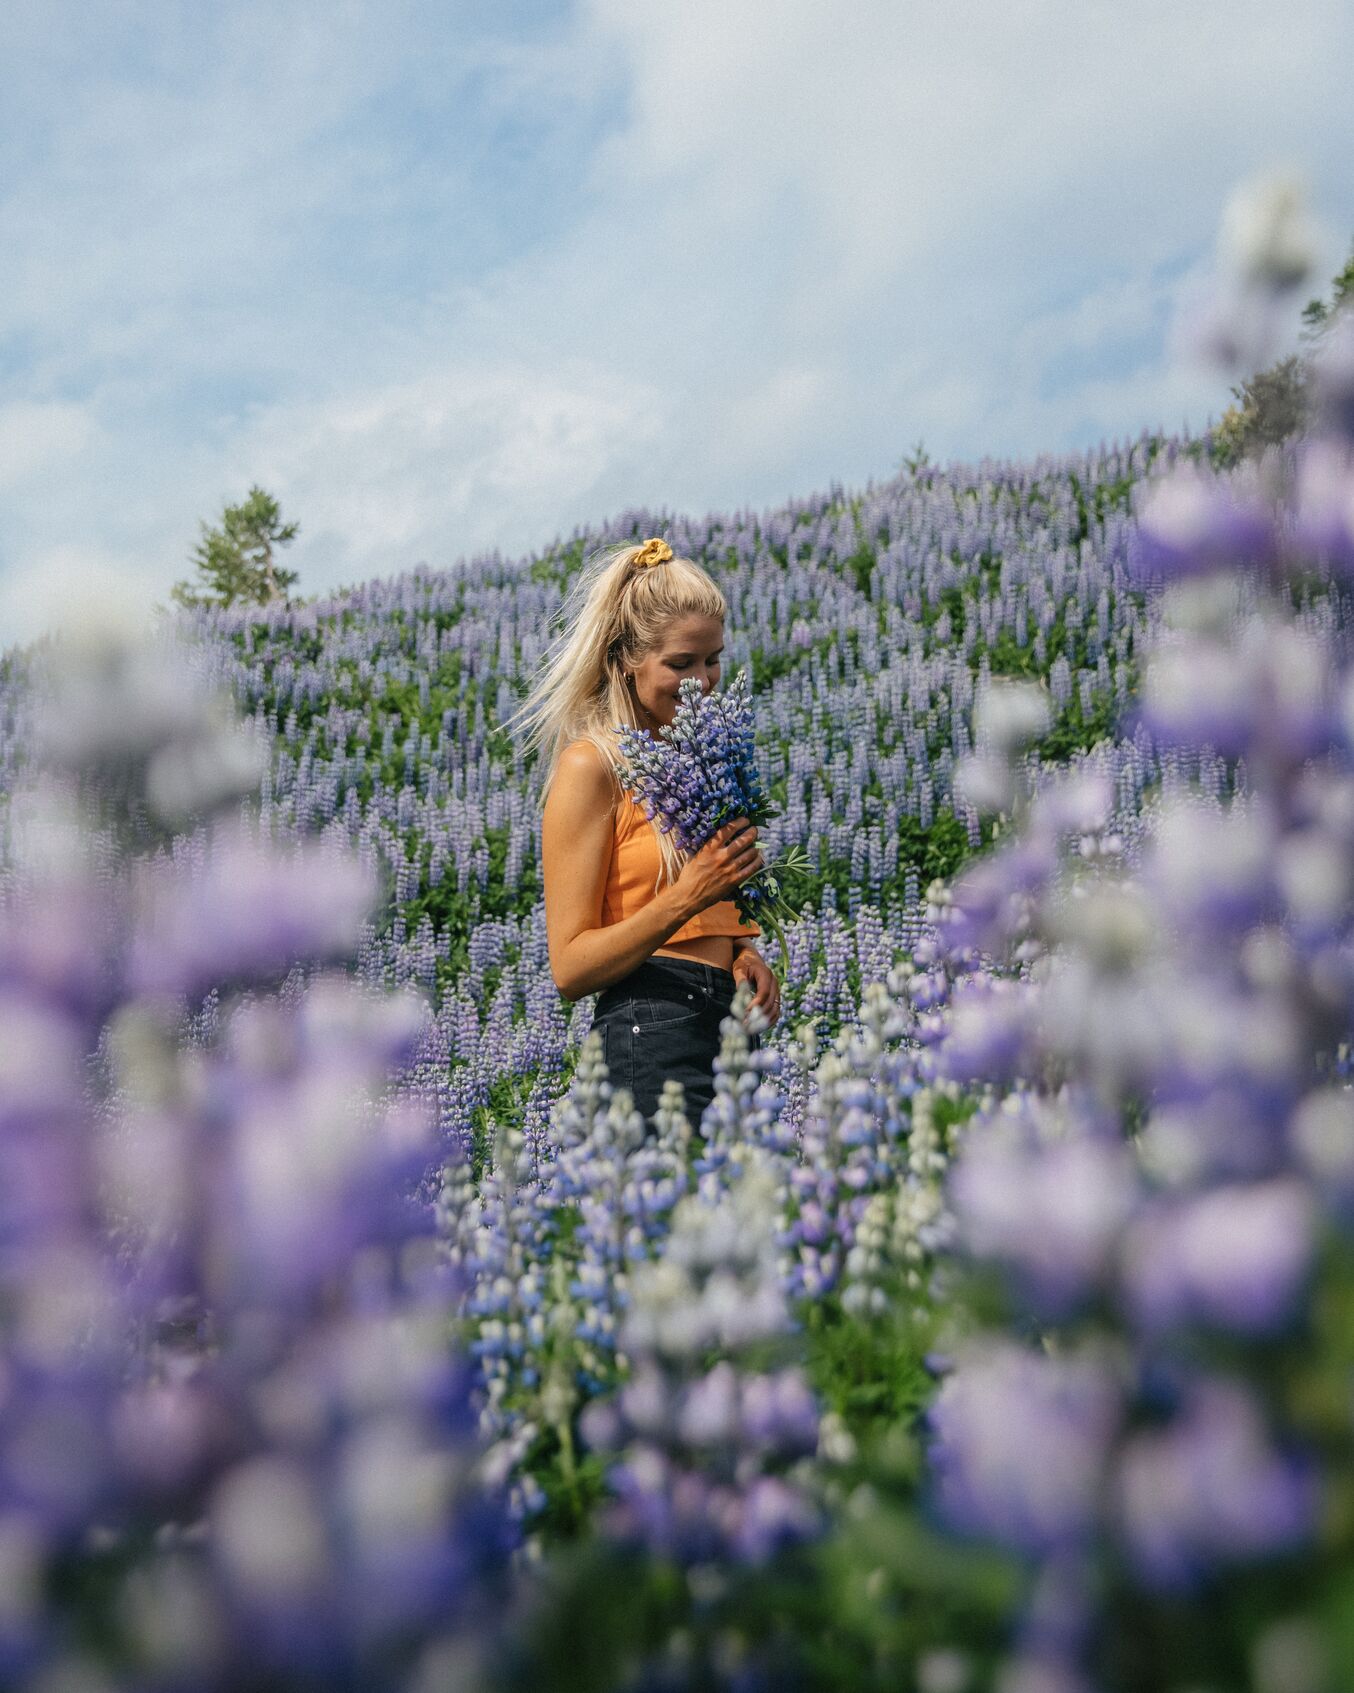 Ása Steinars surrounded by a field of lupine. She is holding a bunch of lupine in her hand and smelling it